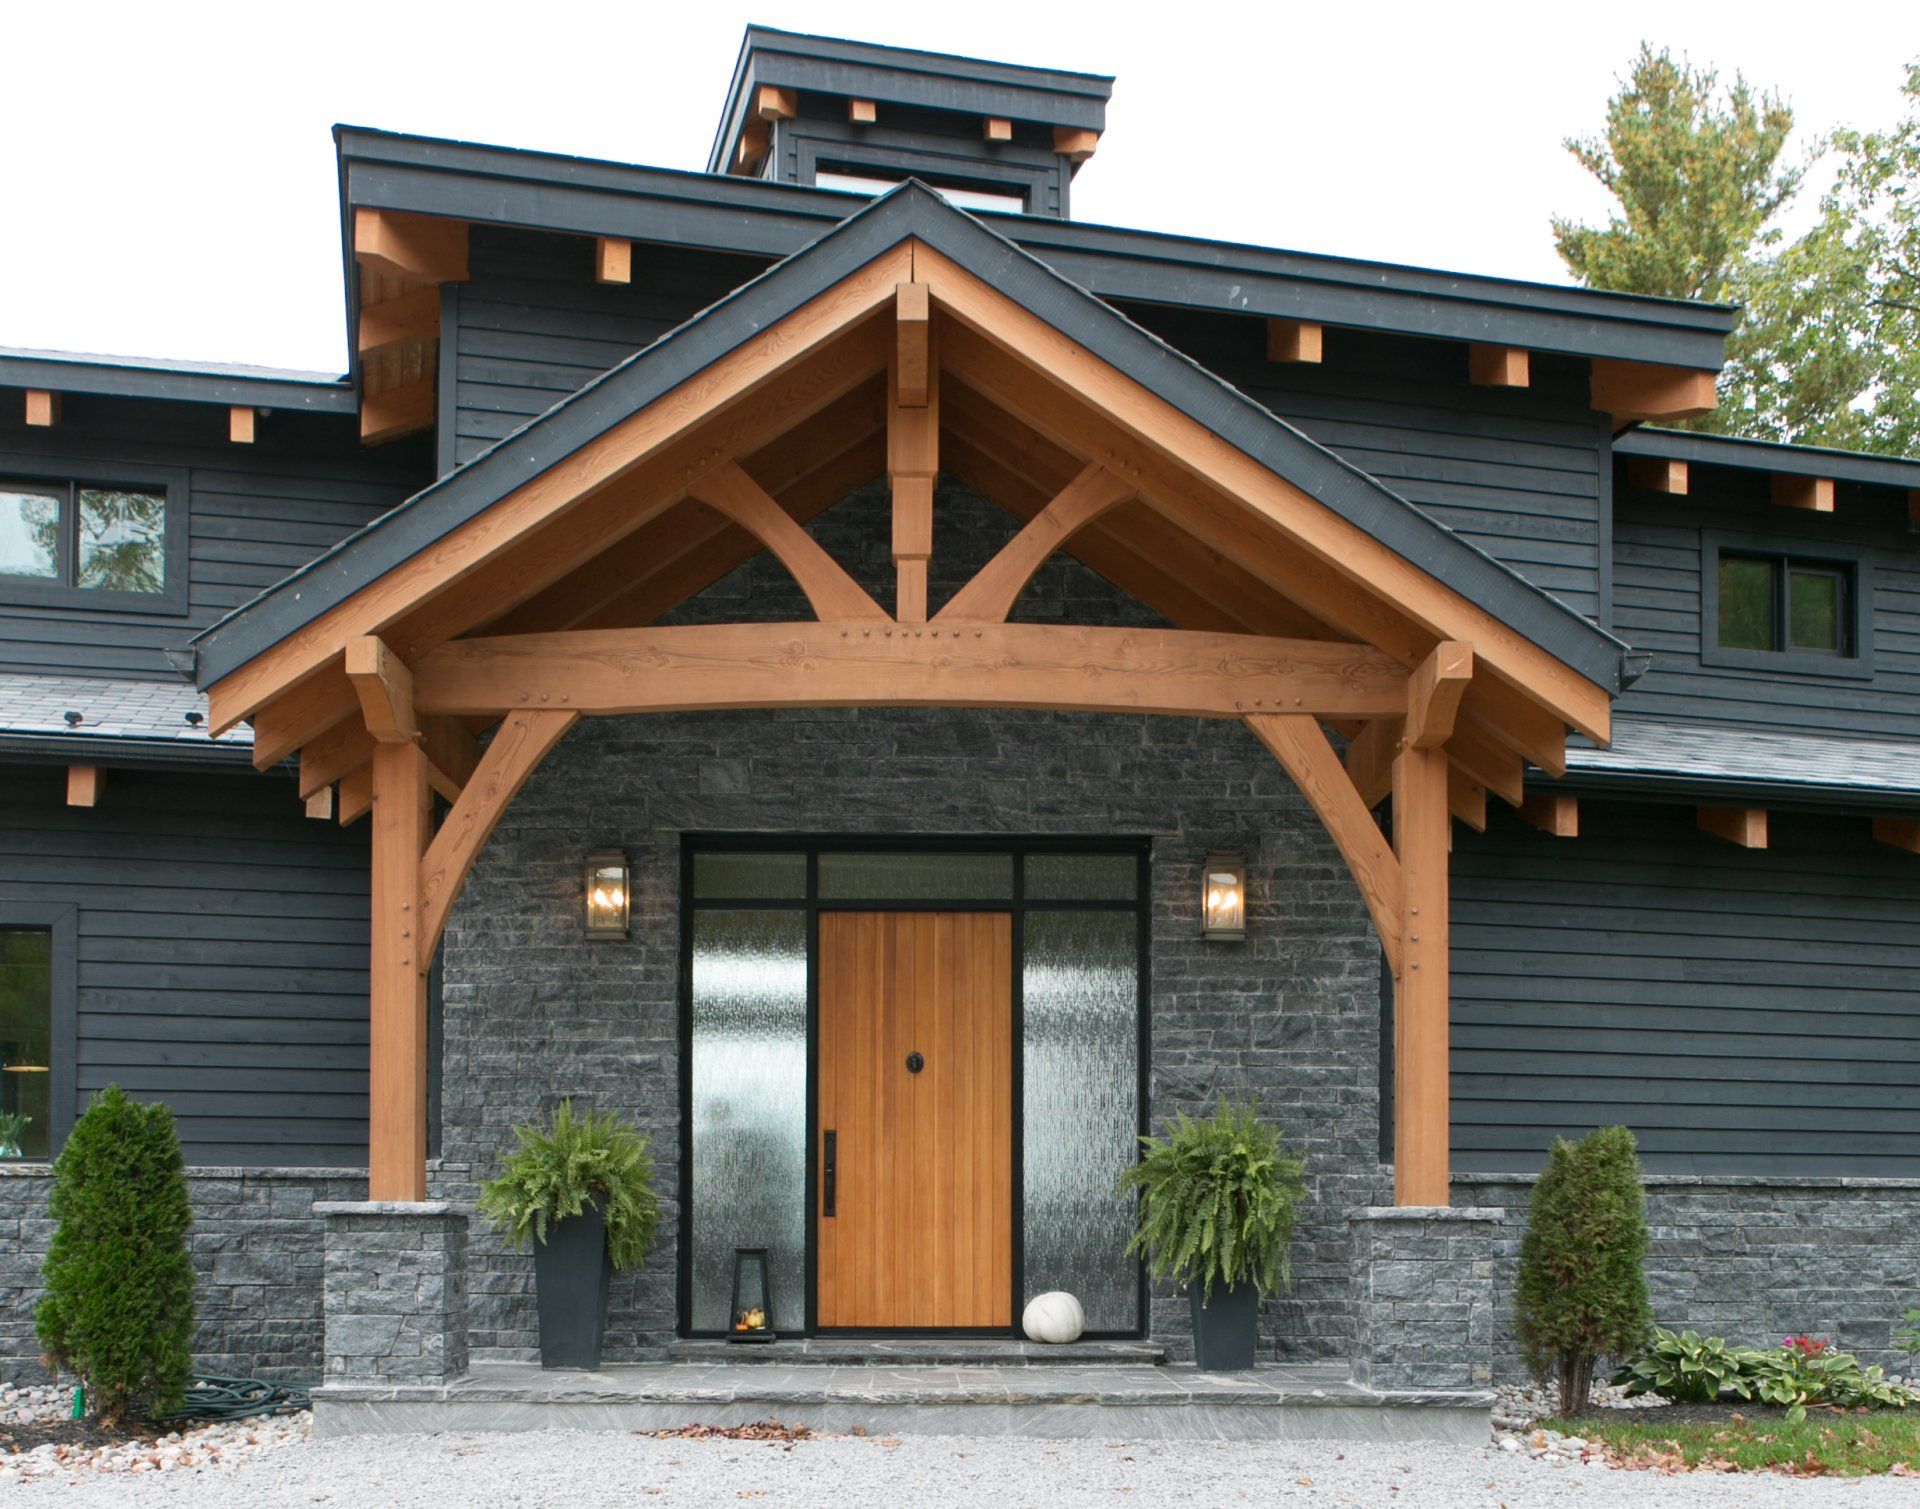 Traditional Muskoka Cottage meets modern style in this CedarCoast lakeside beauty|!